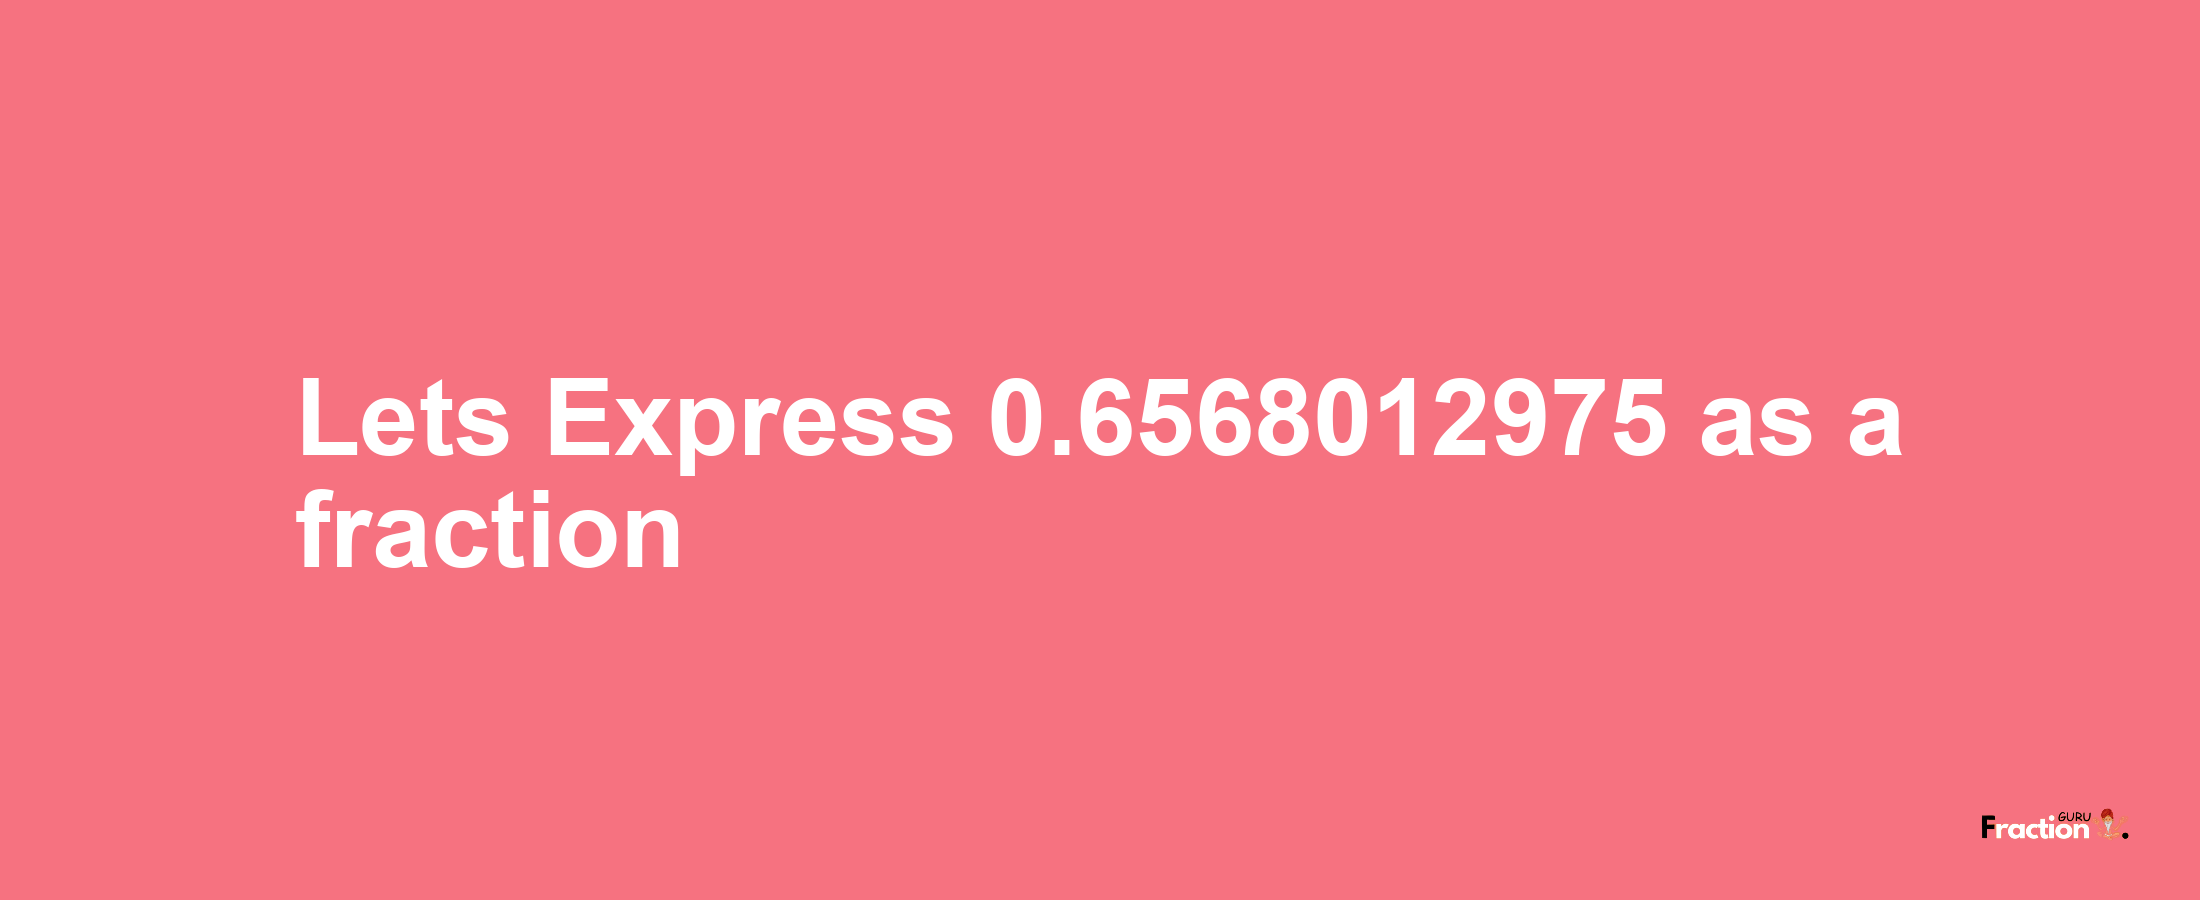 Lets Express 0.6568012975 as afraction